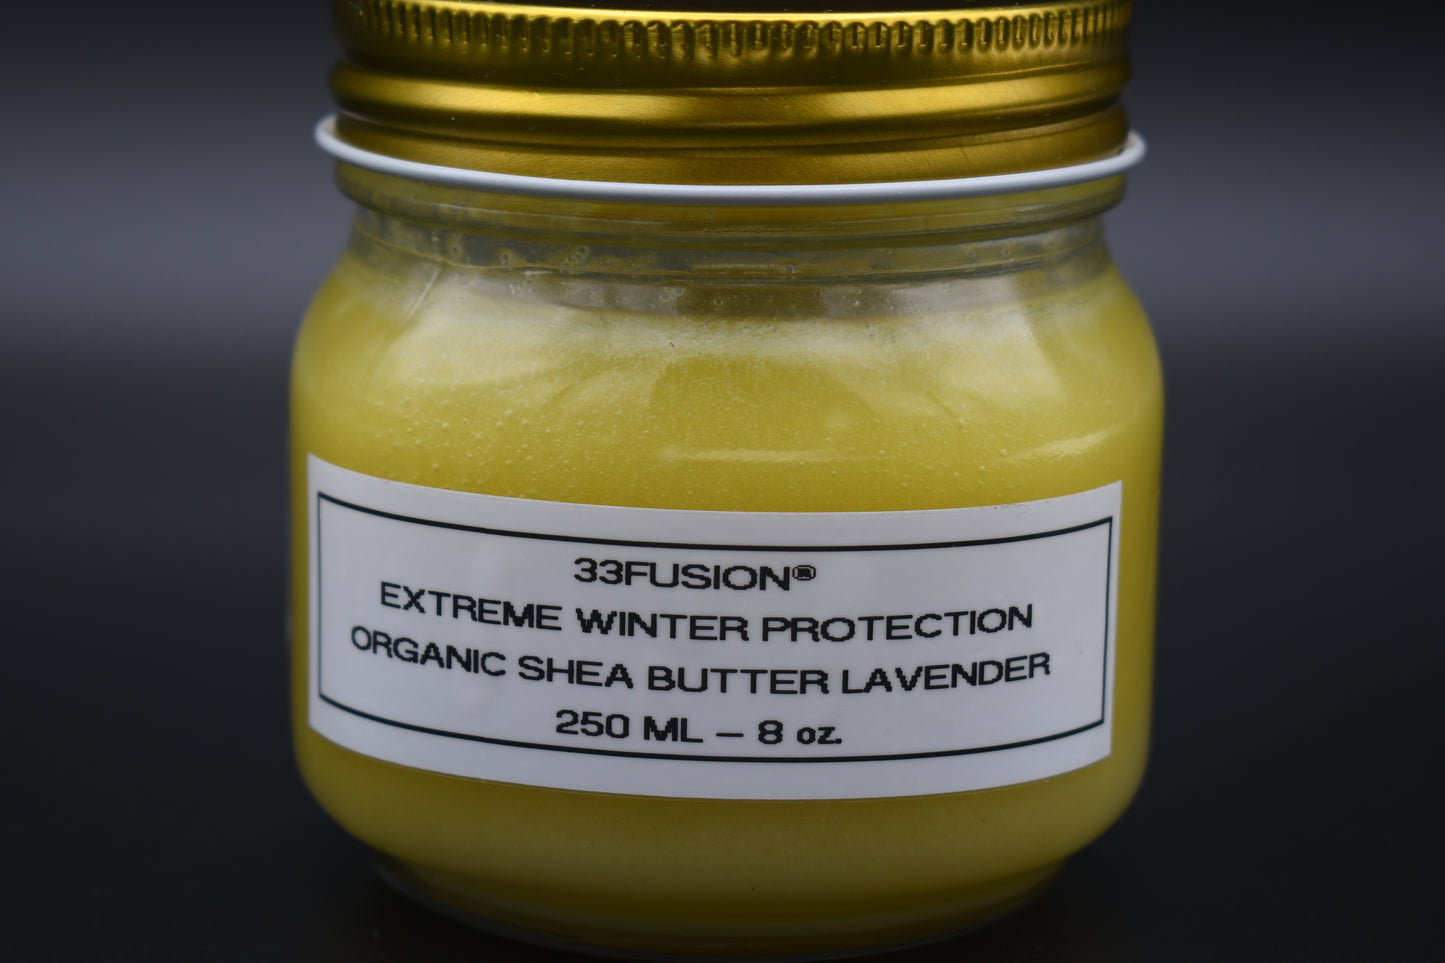 Extreme Winter Protection Organic Shea Butter